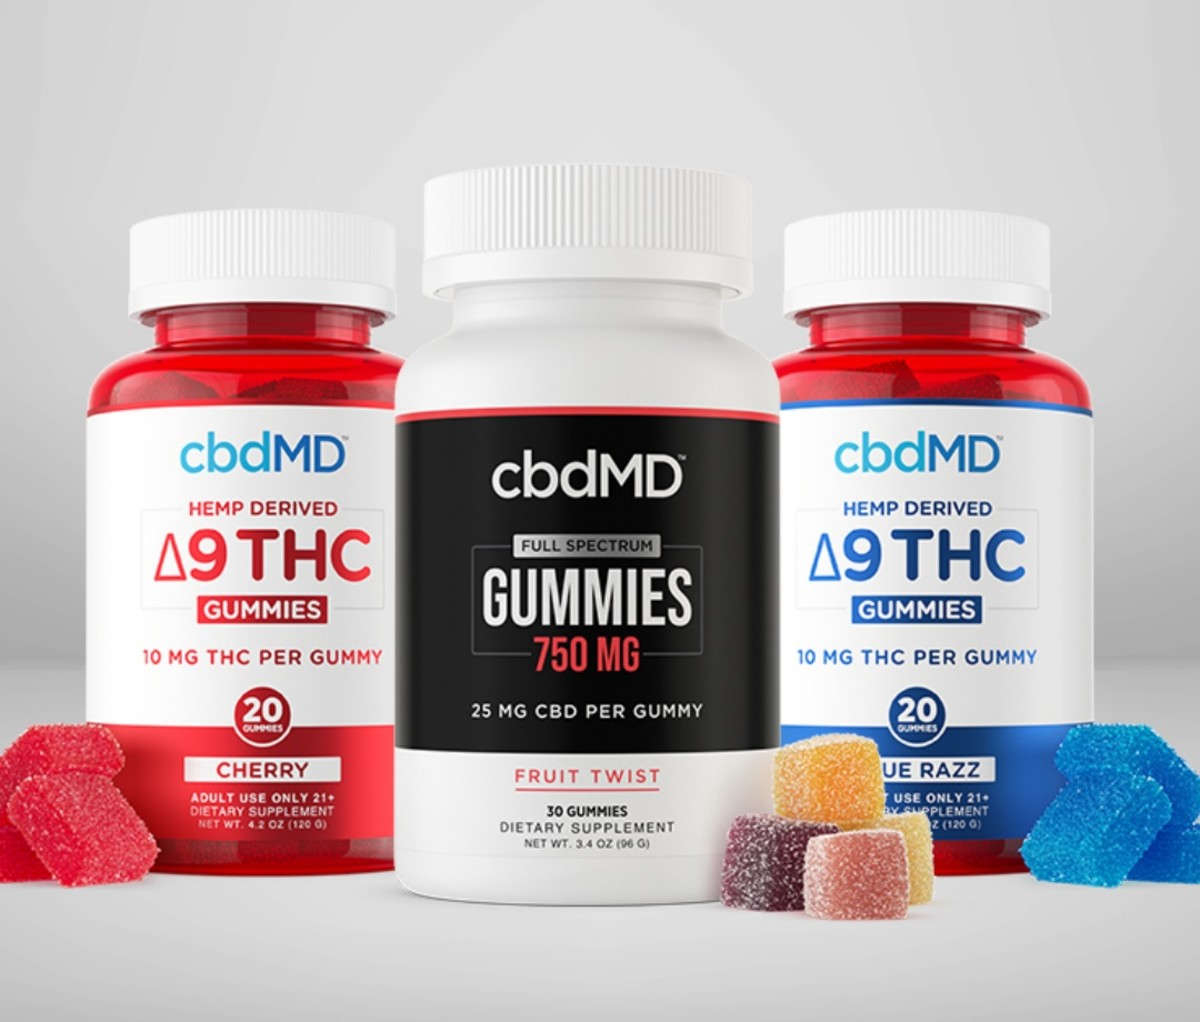 cbdMD gummies and bottles on a grey background